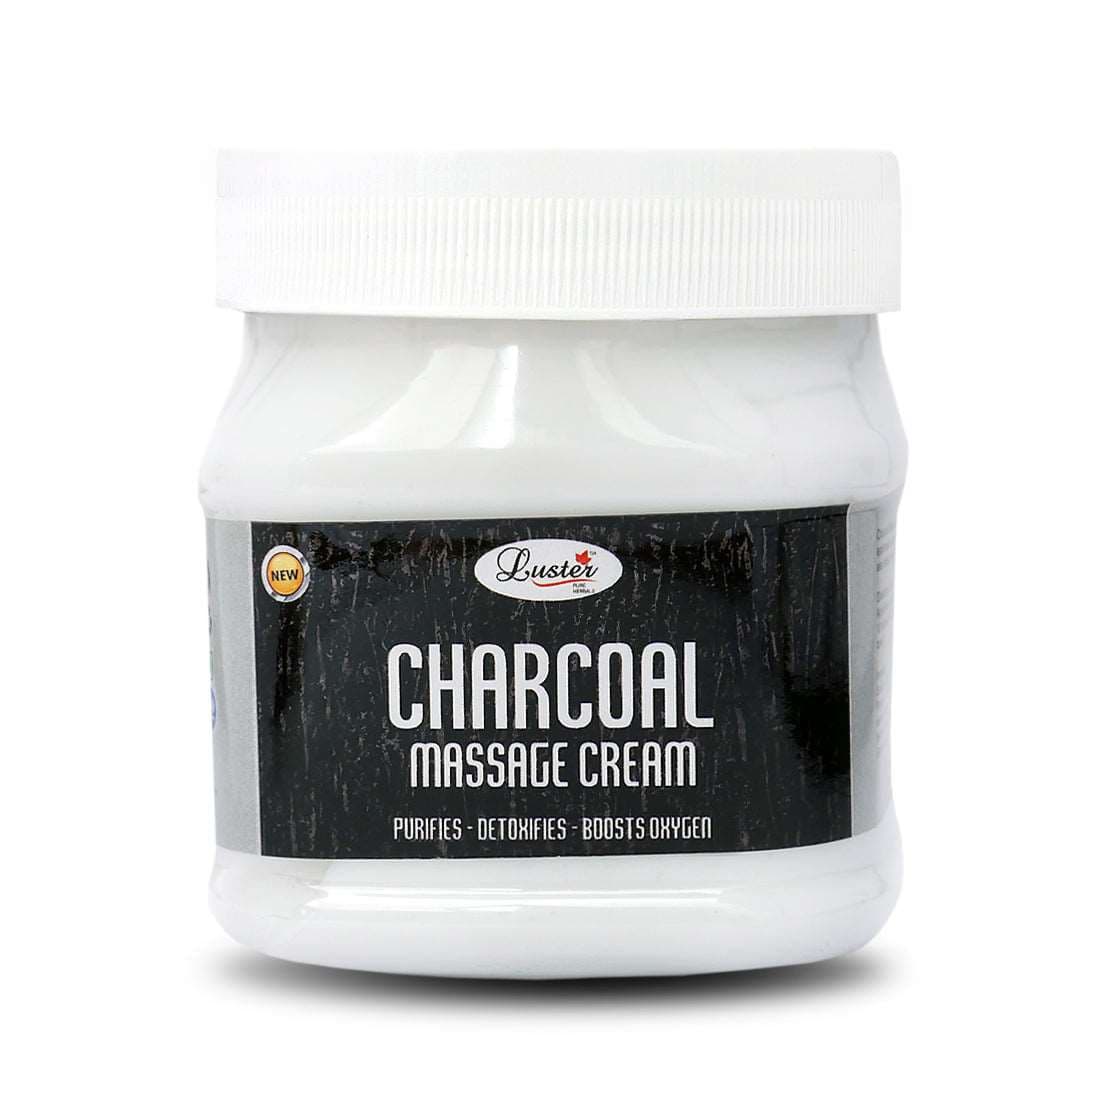 Luster Charcoal Face & Body Massage Cream (Paraben & Sulfate Free) - 500 ml